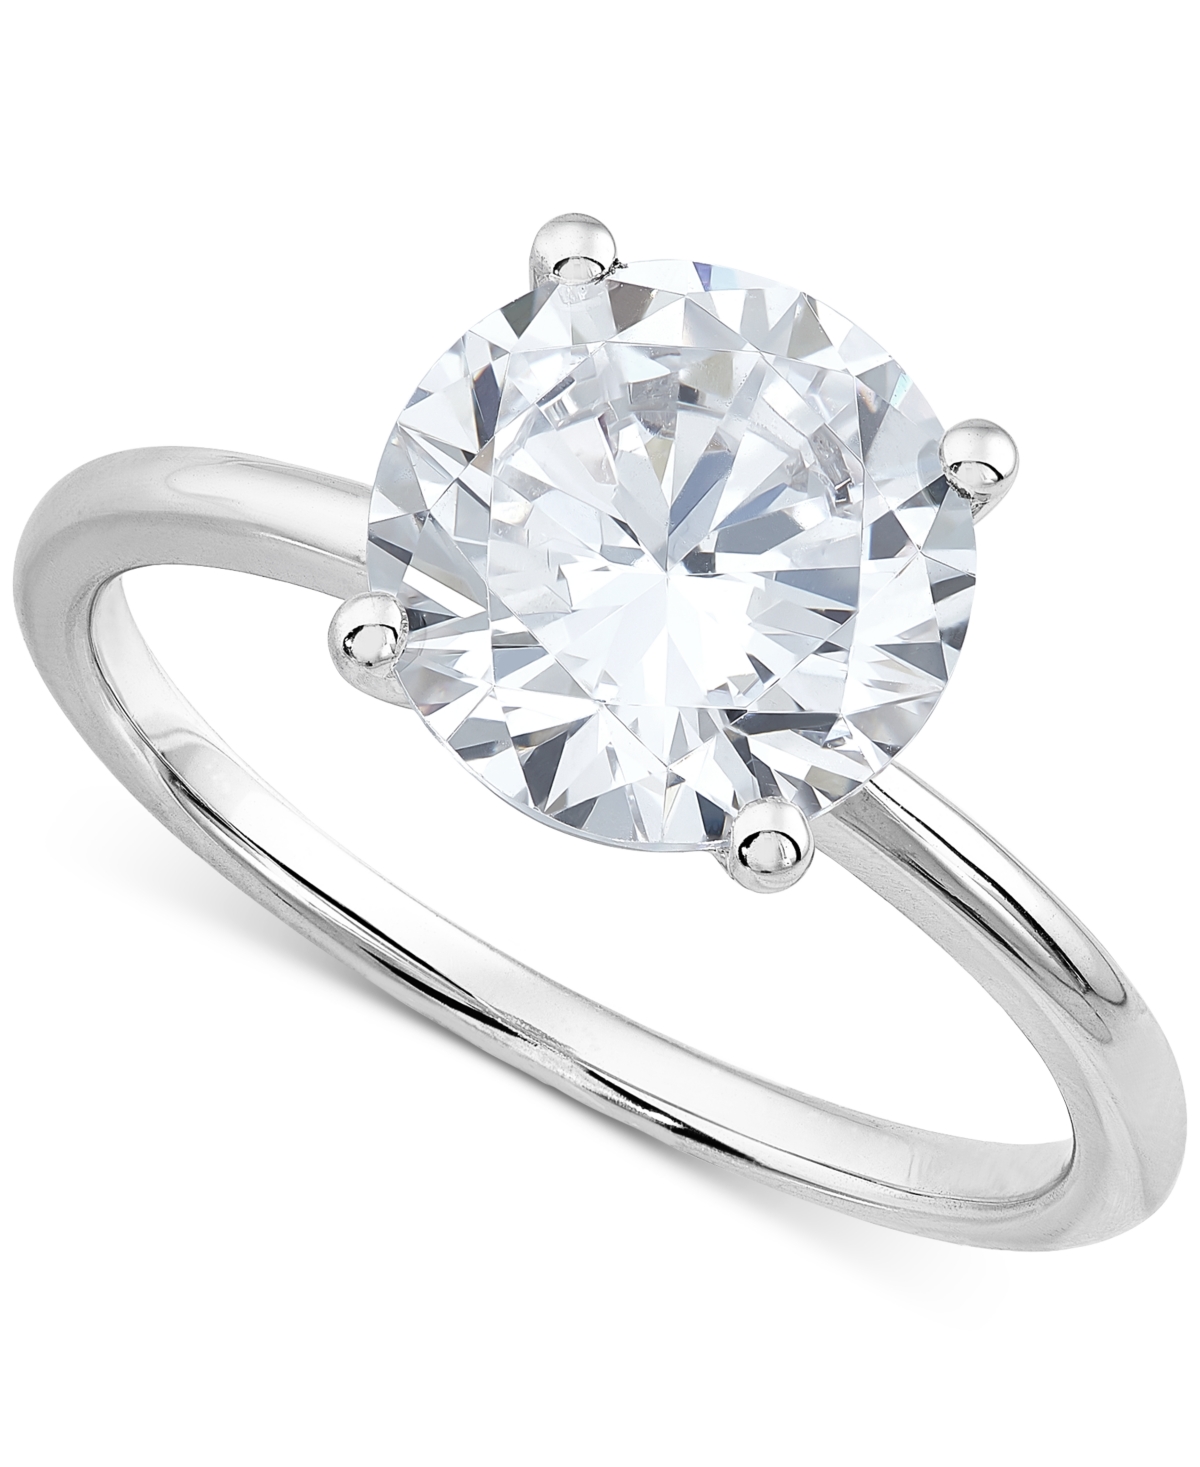 Grown With Love Igi Certified Lab Grown Diamond Solitaire Engagement Ring (3 ct. t.w.) in 14k White Gold